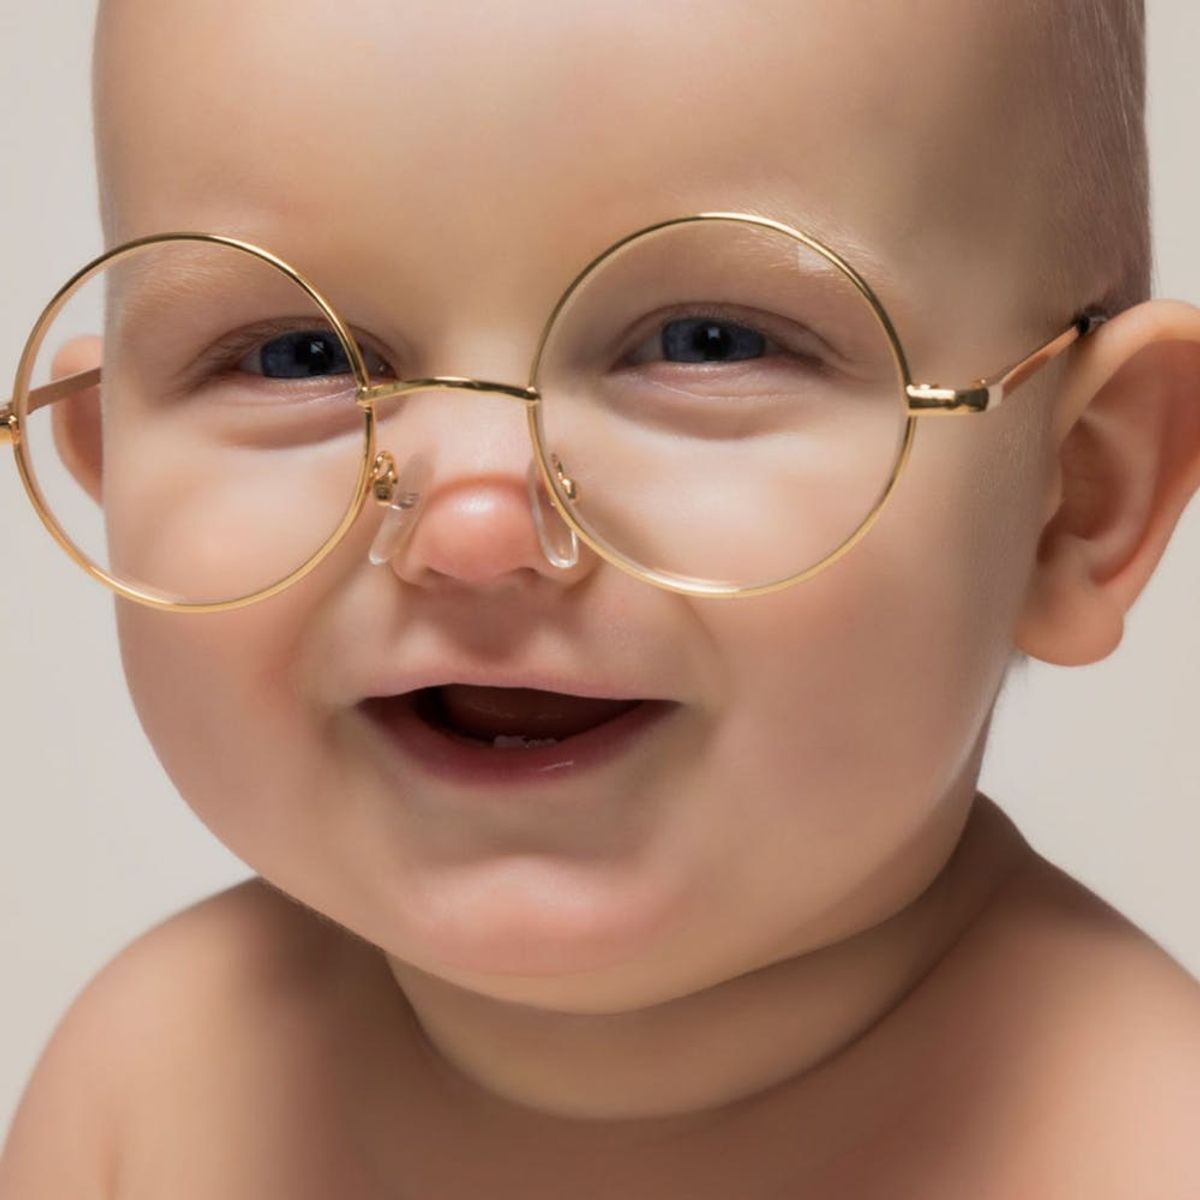 Harry Potter Had This Surprising Effect on Baby Names